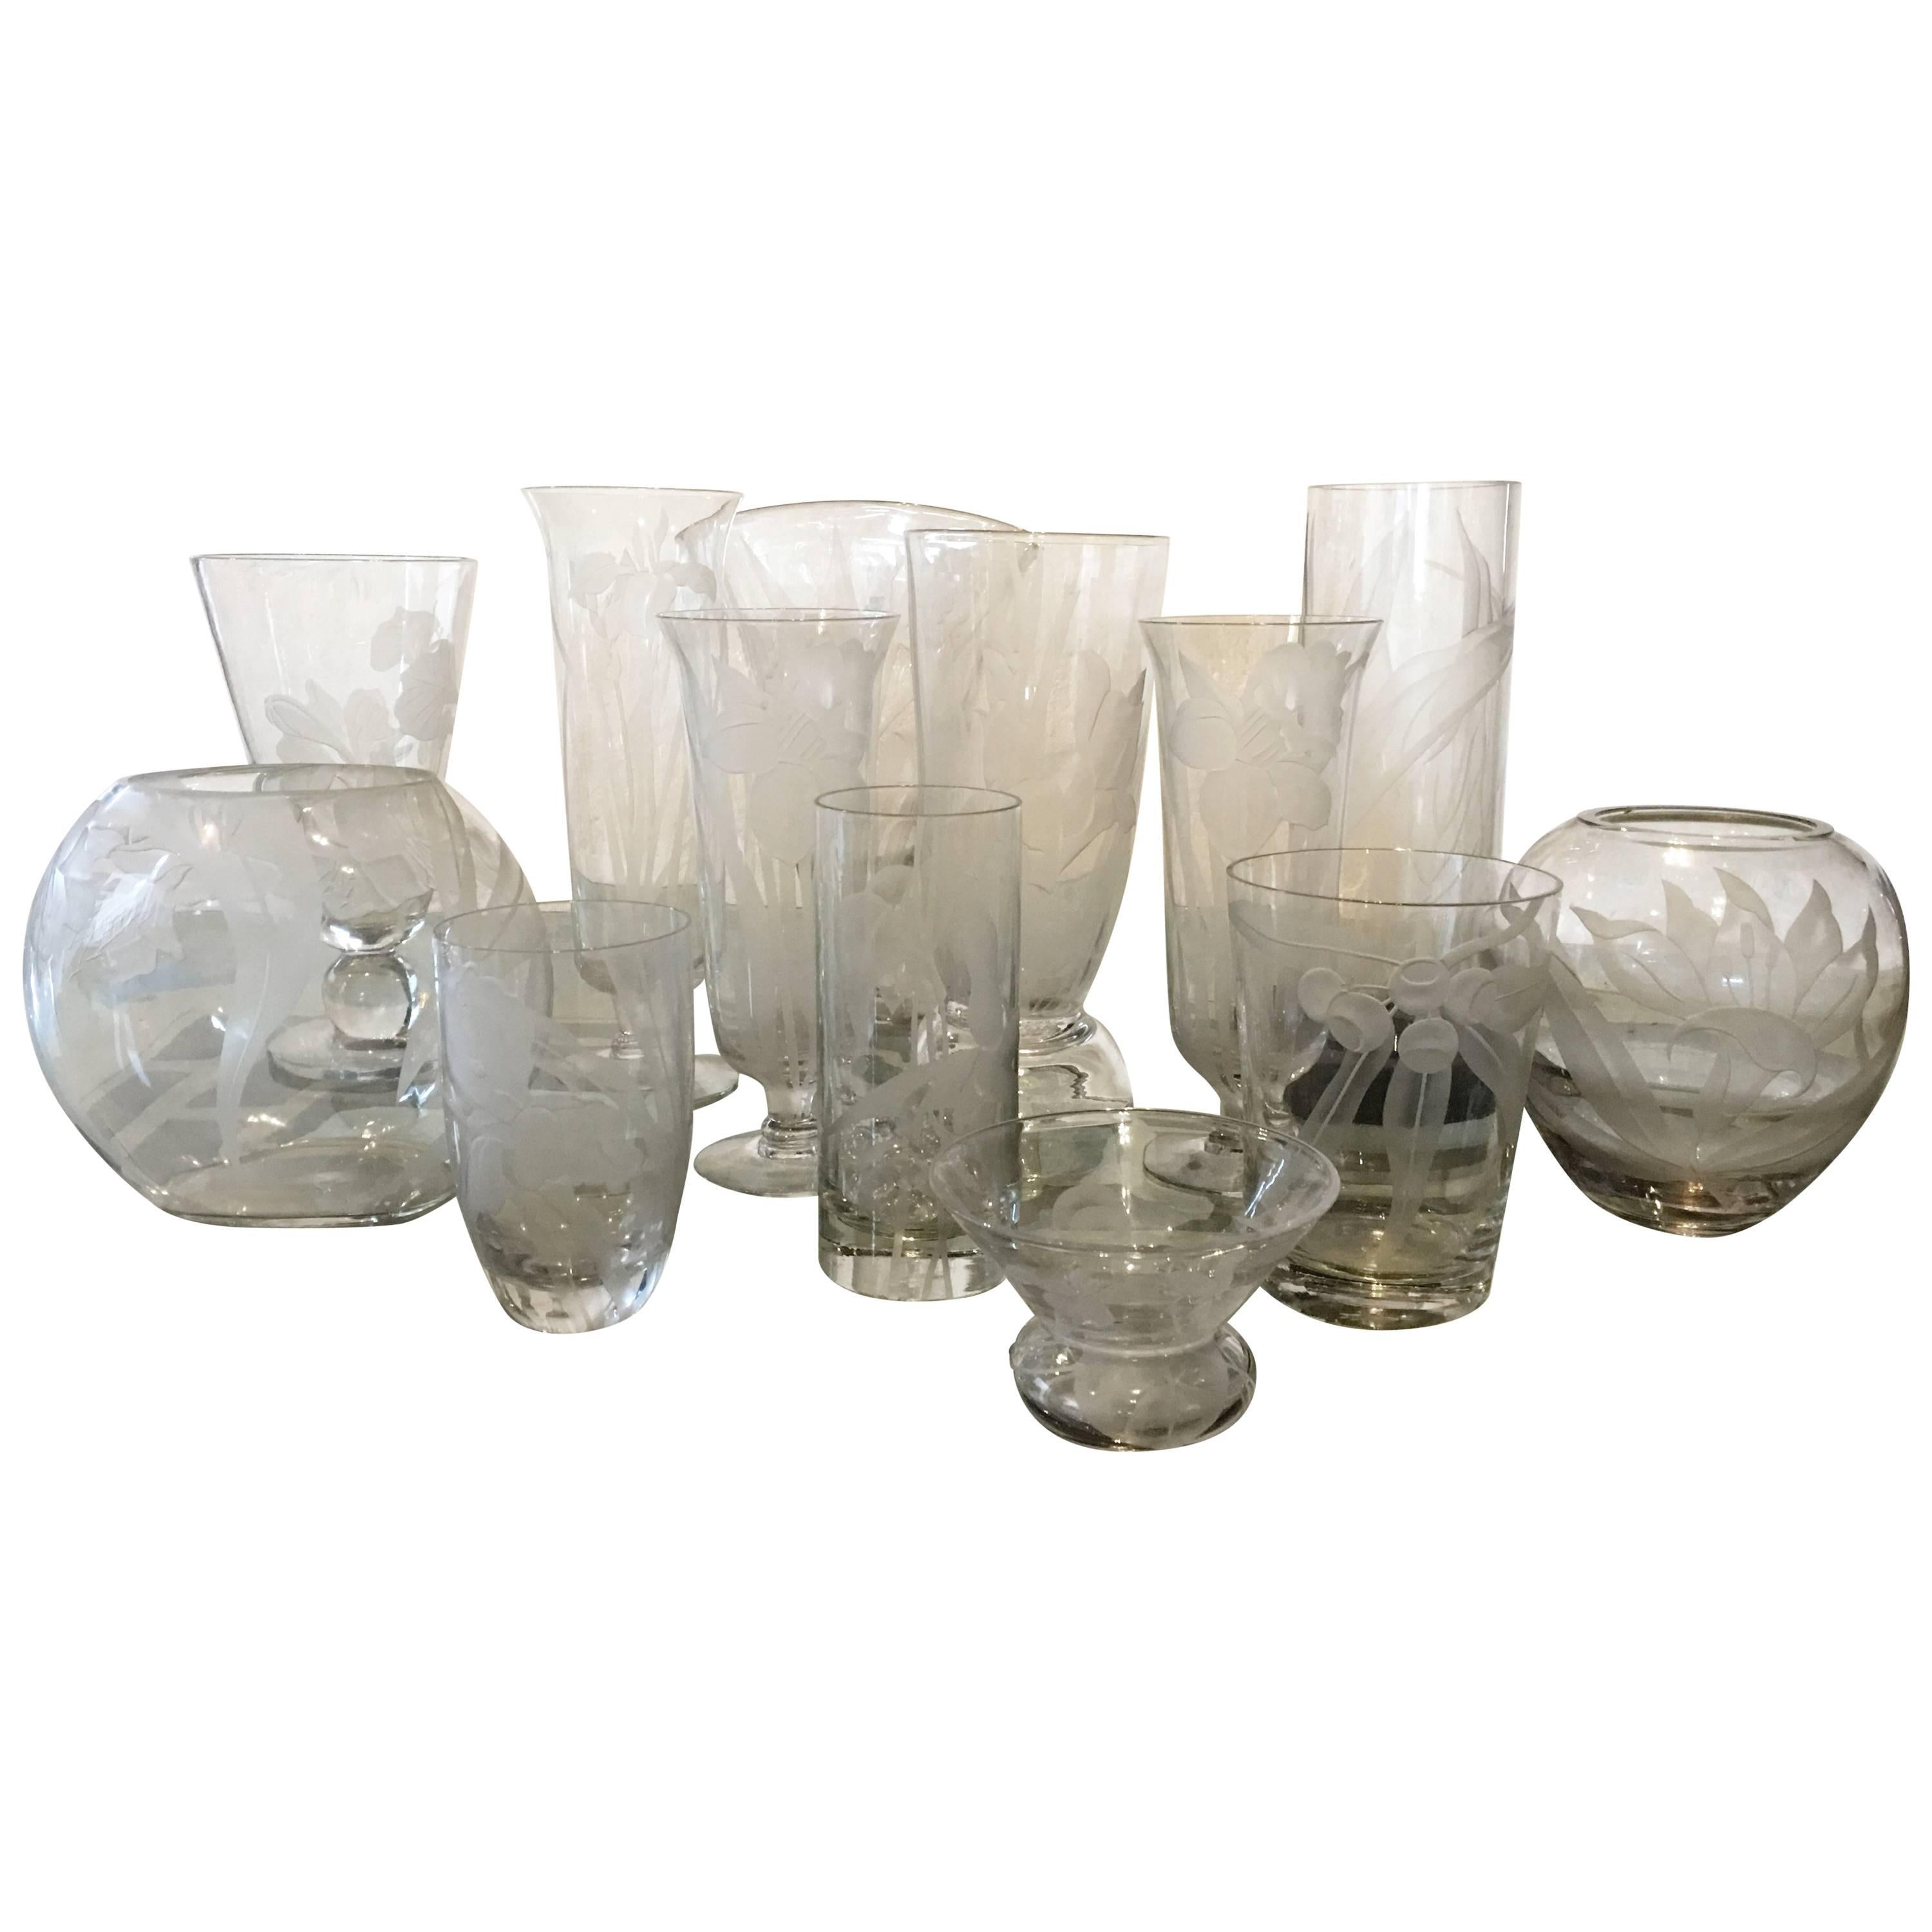 Large 13 Piece Collection of Dorothy Thorpe Floral Etched Glass Vases